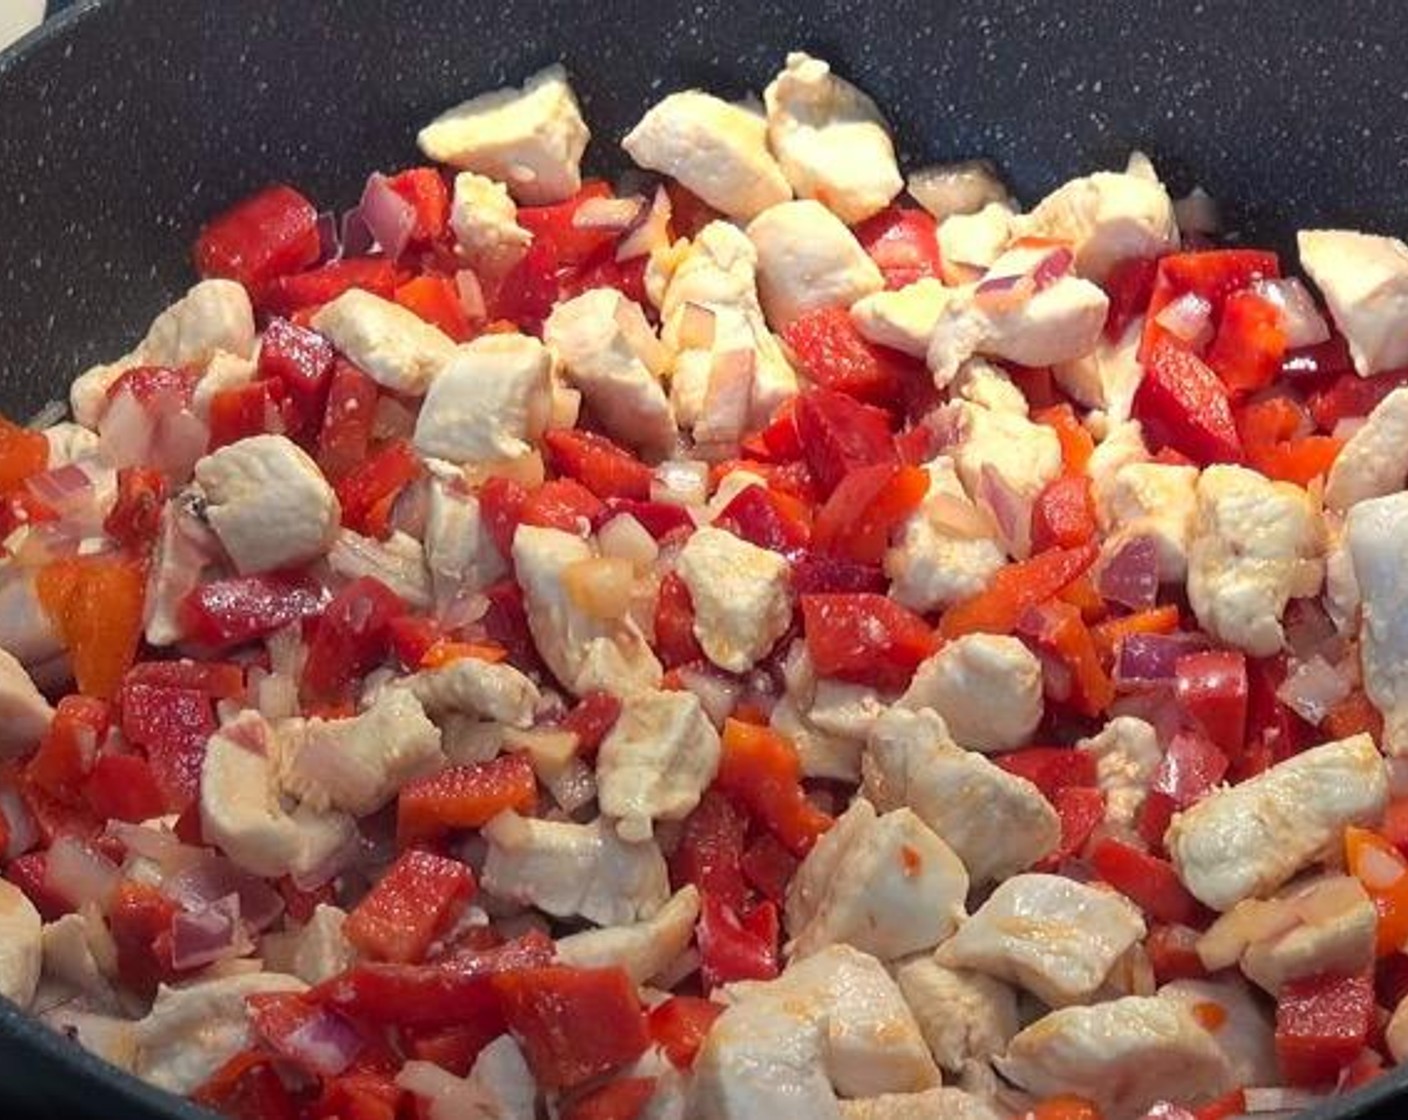 step 2 Add Red Onion (1) and Red Bell Peppers (2). Cook, stirring occasionally, until vegetables have started to soften.